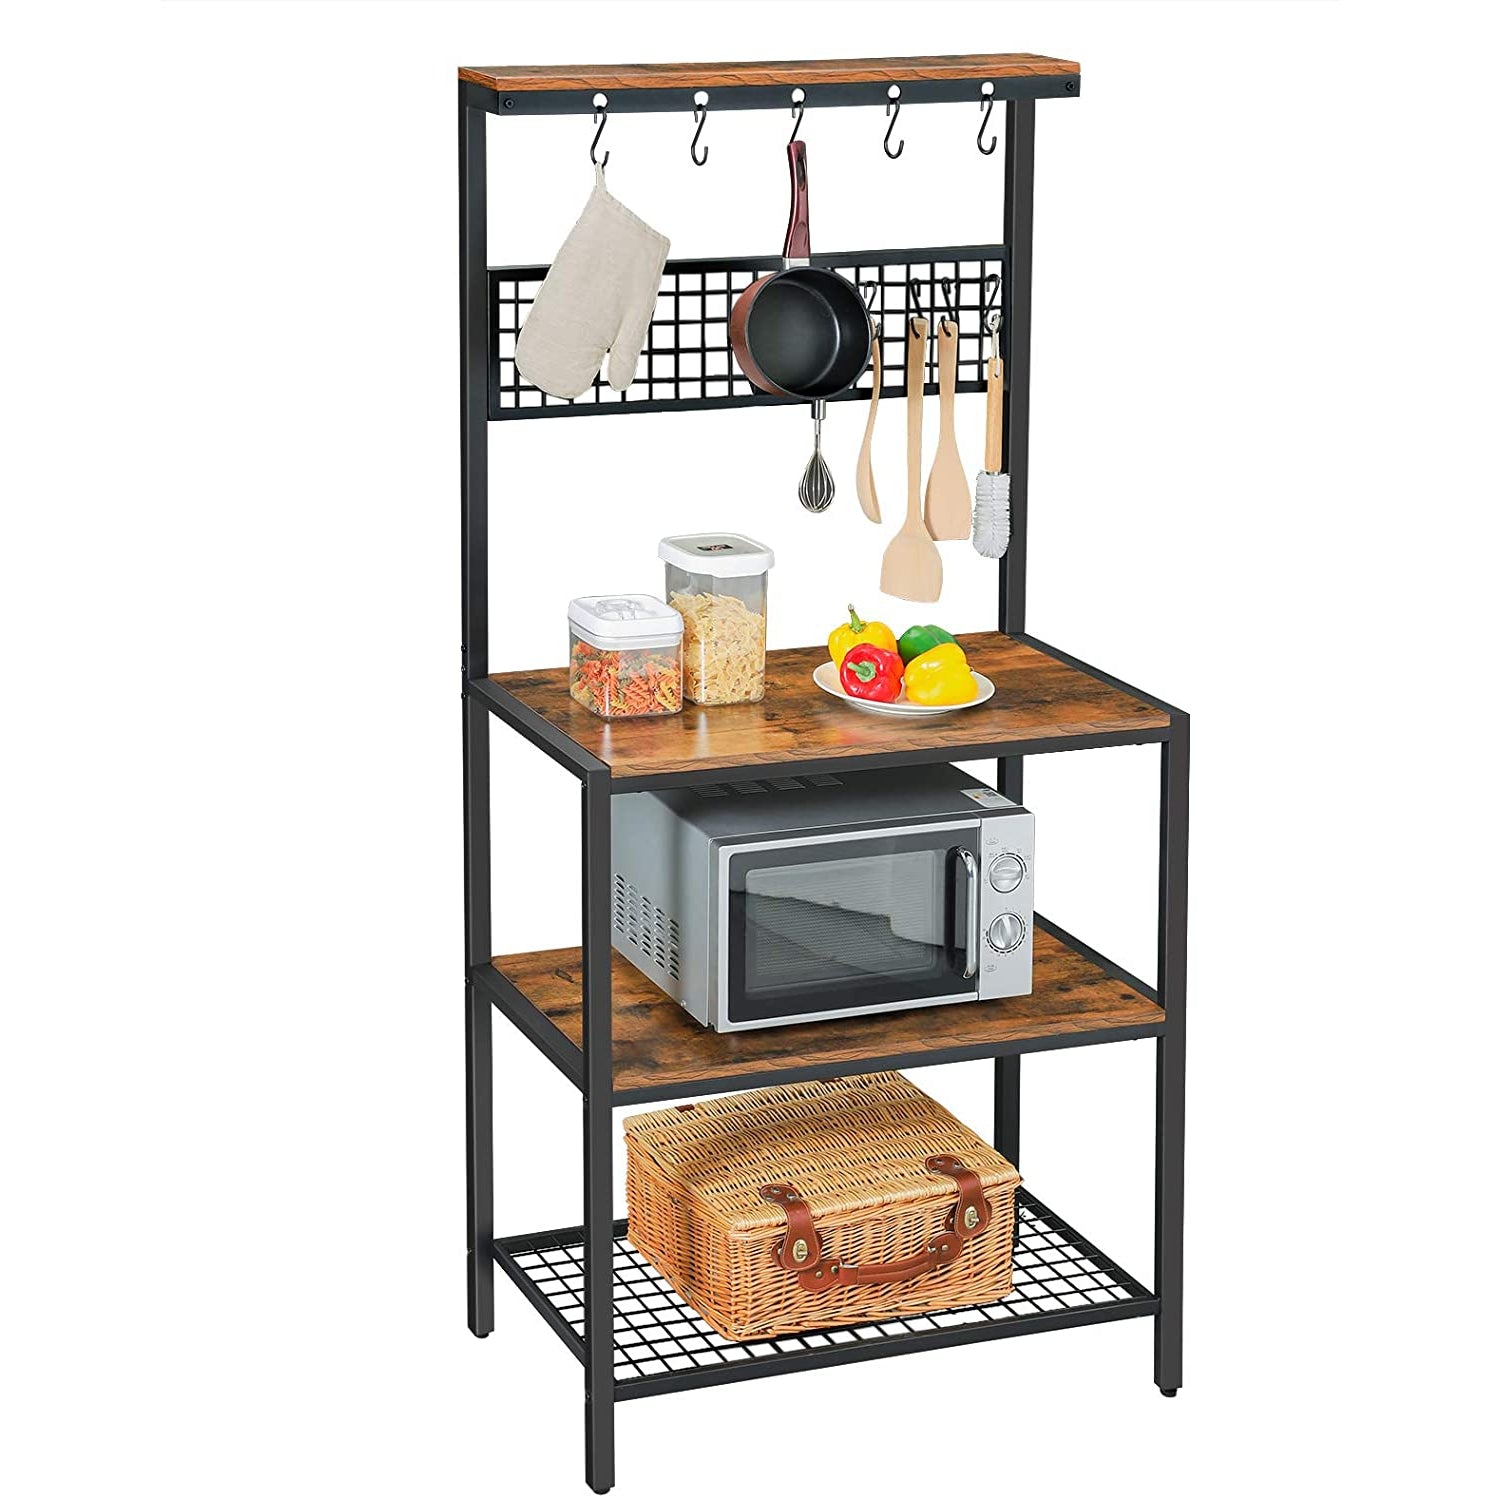 Nancy's Gordons Kitchen Cabinet - Kitchen Rack - Kitchen Cabinets - Standing Rack with Hooks and Shelves - 84 x 40 x 170 cm